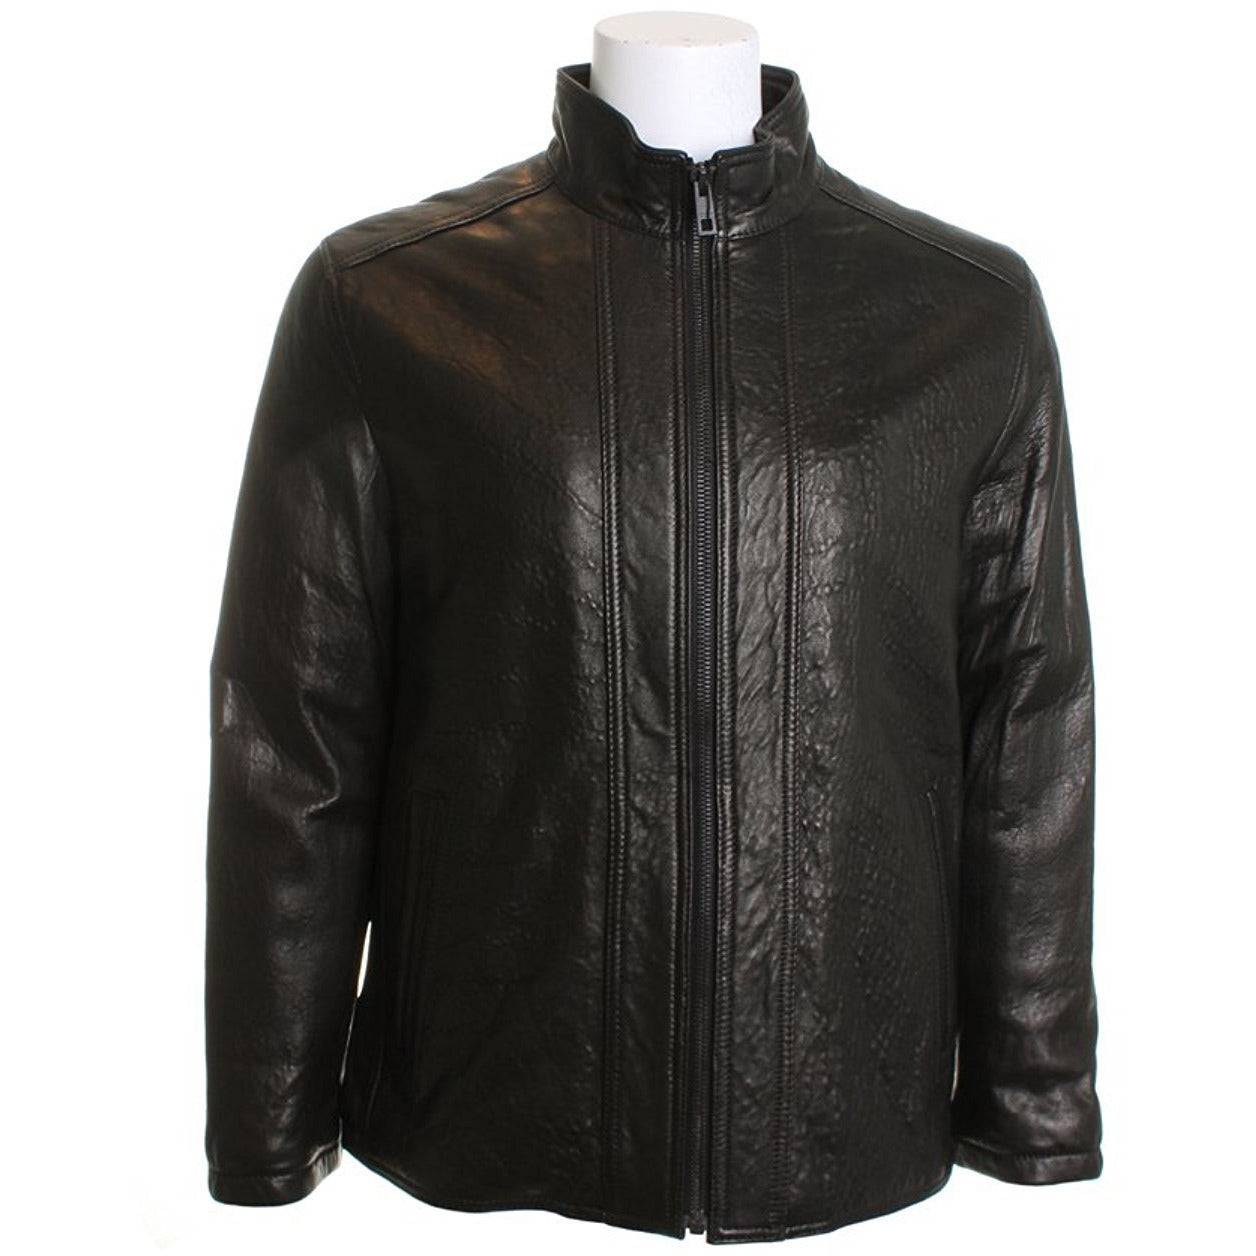 Marc New York by Andrew Marc Men's Zip Front Leather Jacket